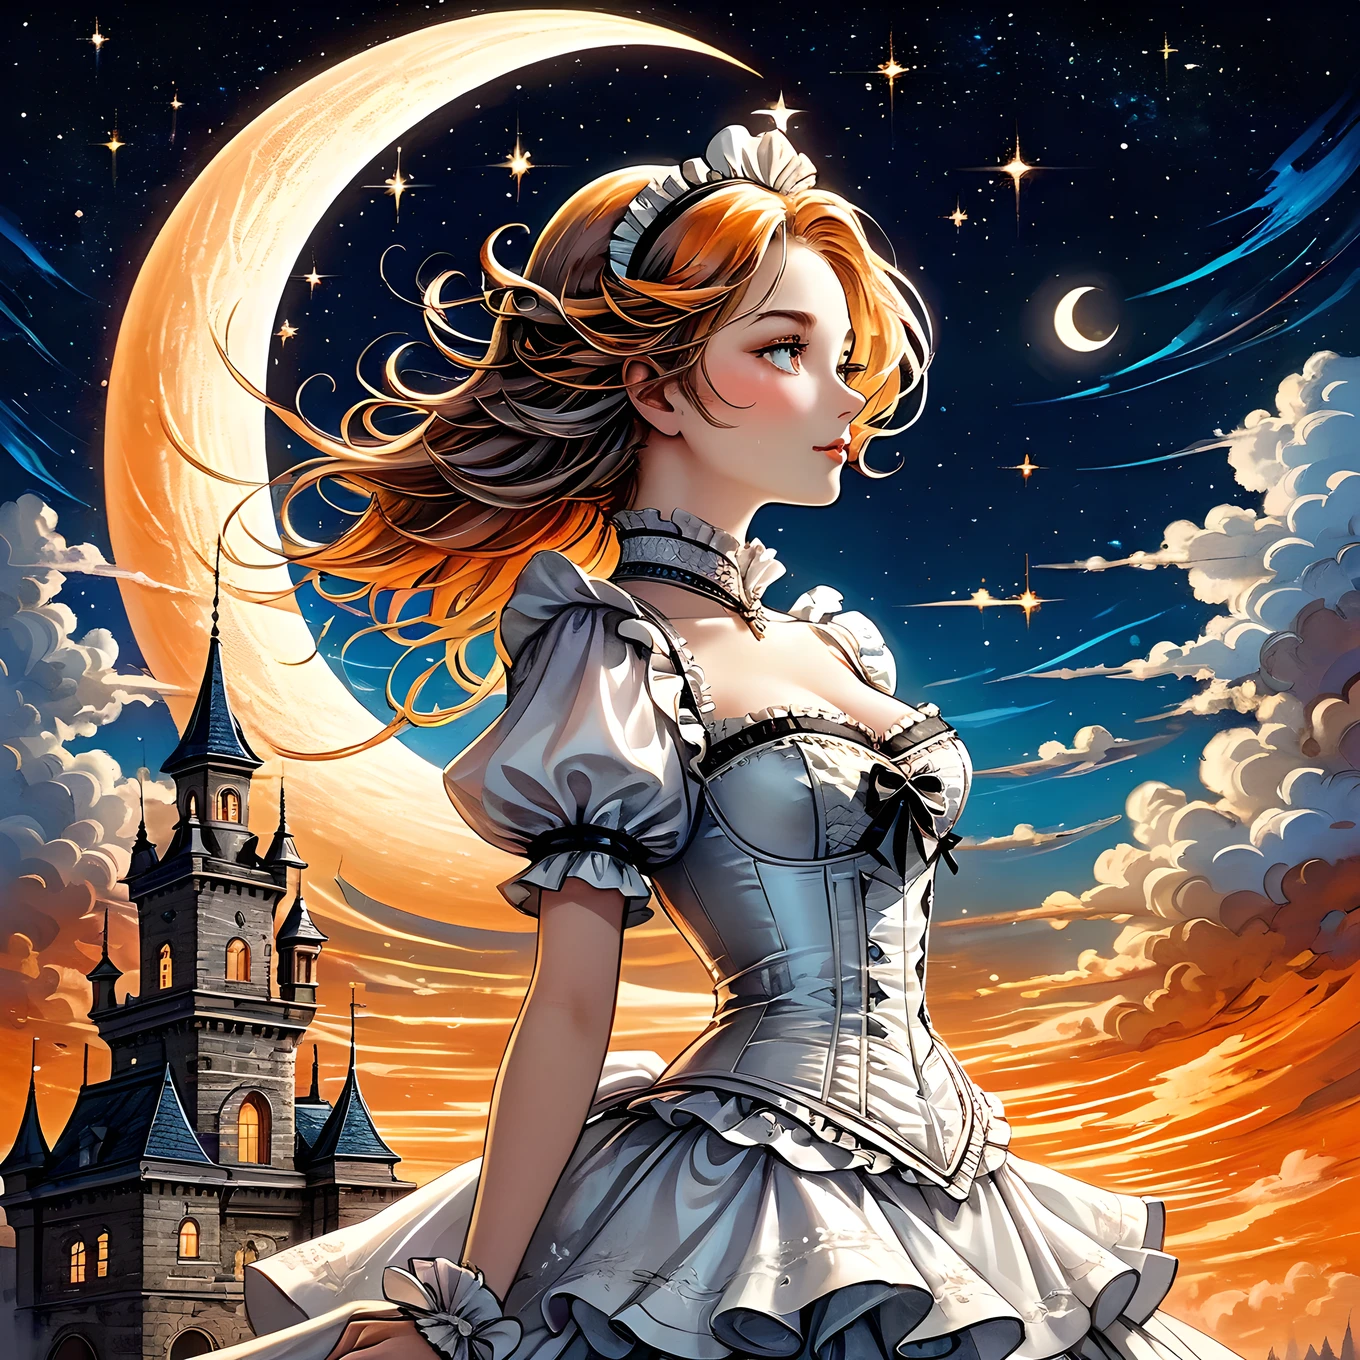 Elaborate illustration of maid with aura of loyalty, intricate detailed corset, profile, vivid contrasts, gentle touch rendering, exact detail, precision, fluffy clouds and crescent moon, single shooting star, (orange neon shooting star trails), high quality oil painting, stunning Beautiful touch rendering, Artistic clouds and moon, Fantasy, Fog around an old castle, glittering star